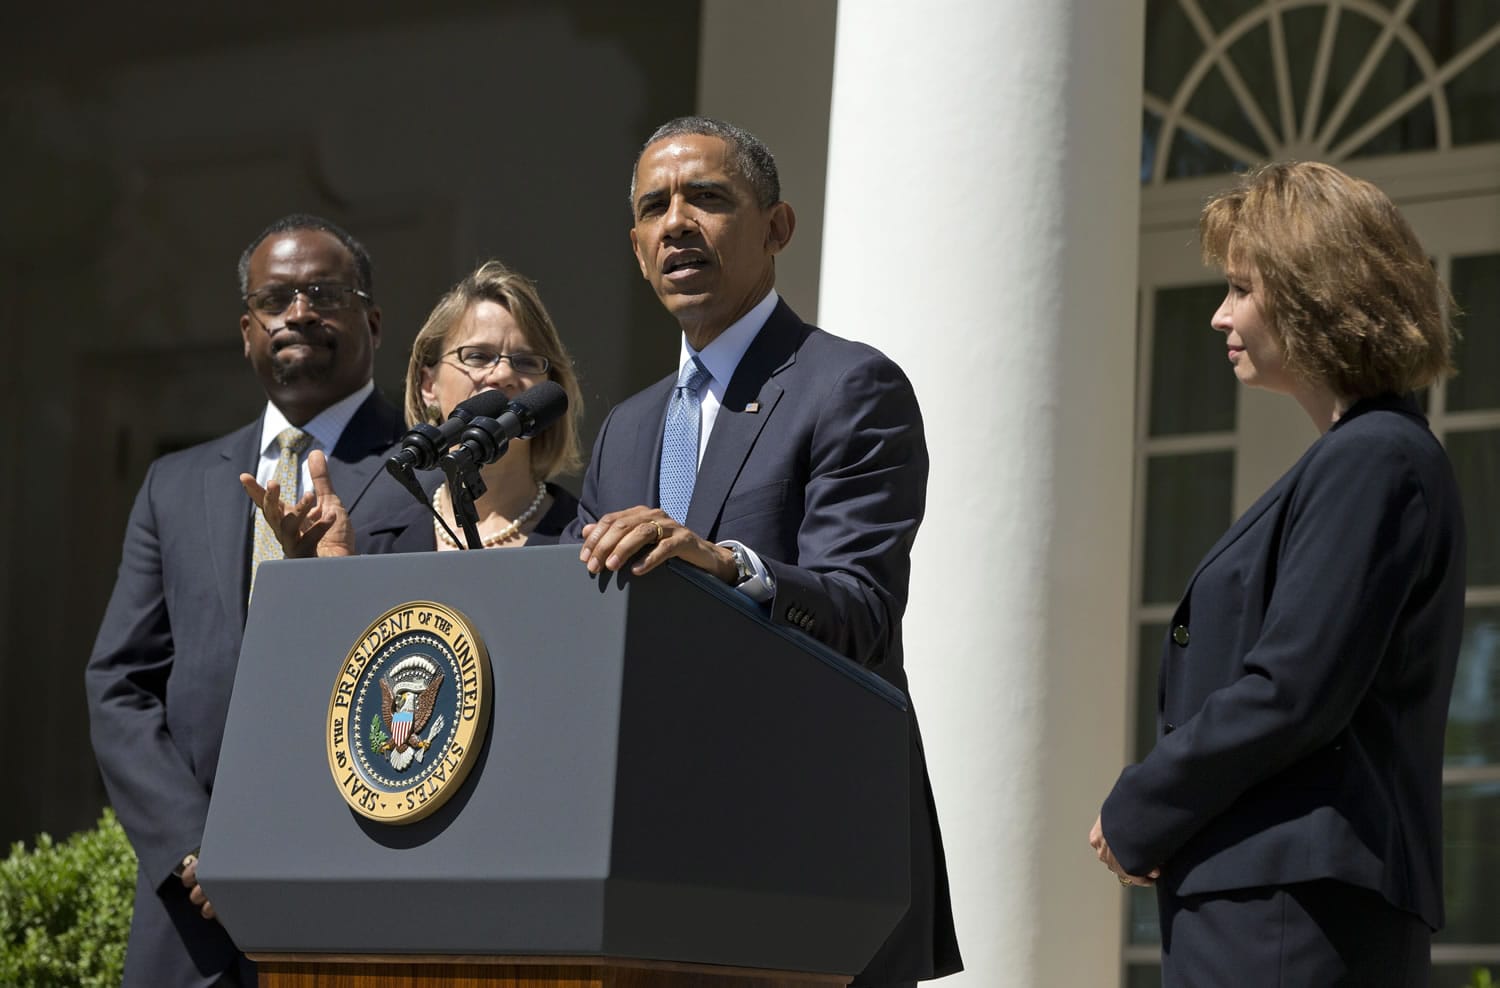 President Barack Obama speaks in the Rose Garden of the White House in Washington on Tuesday to announced the nominations of, from left, Robert Wilkins, Cornelia Pillard and Patricia Ann Millet to the federal appeals court in Washington.